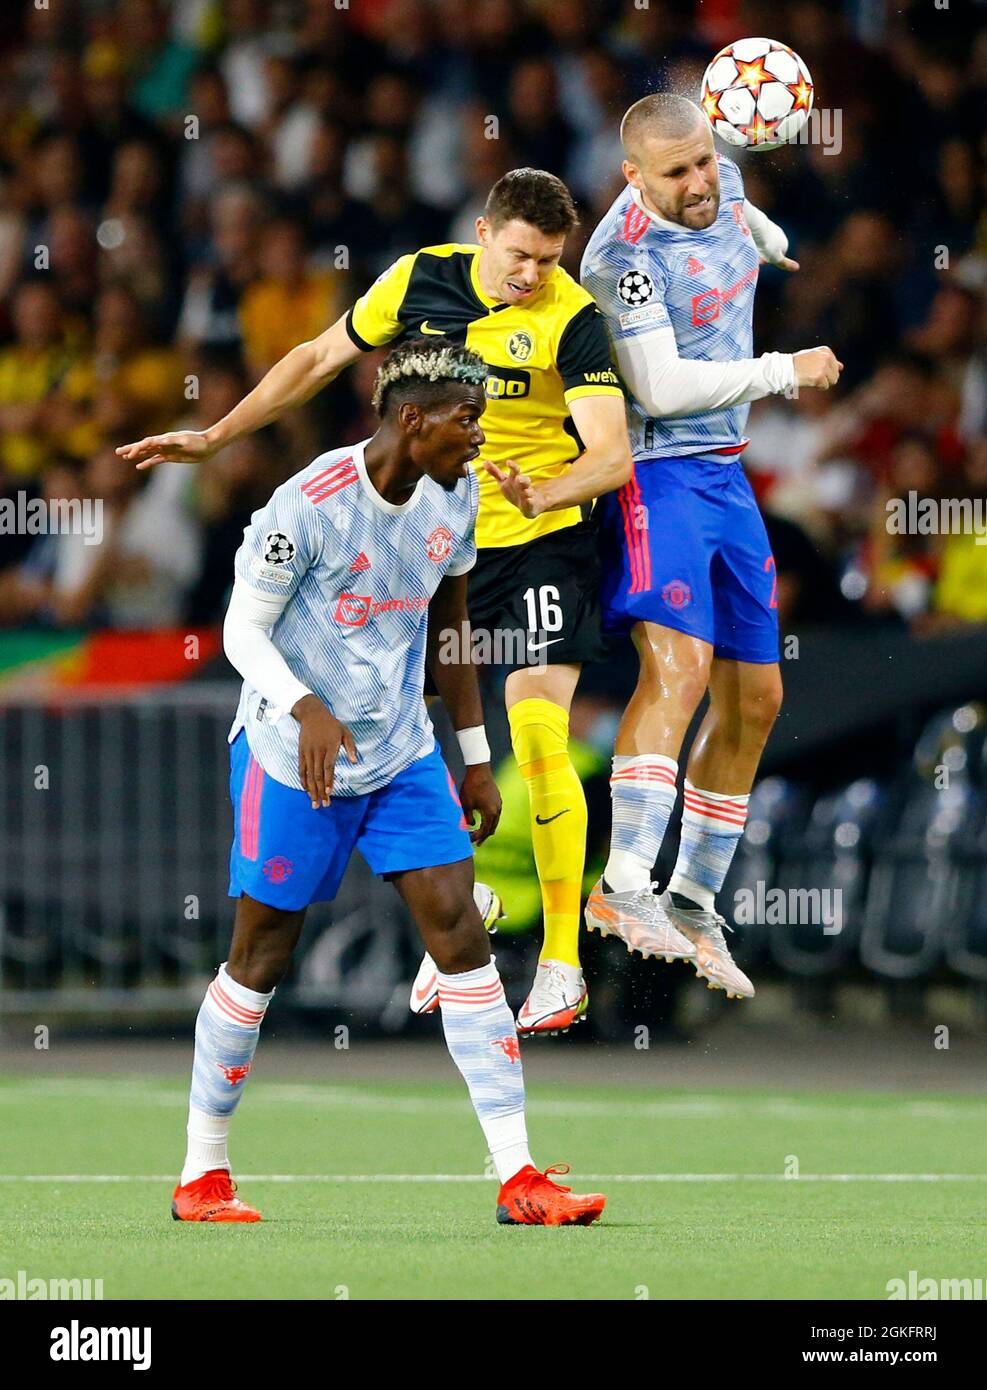 Soccer Football - Champions League - Group F - BSC Young Boys v Manchester United - Stadion Wankdorf, Bern, Switzerland- September 14, 2021 Manchester United's Luke Shaw and Paul Pogba in action with BSC Young Boys' Christian Fassnacht REUTERS/Arnd Wiegmann Stock Photo